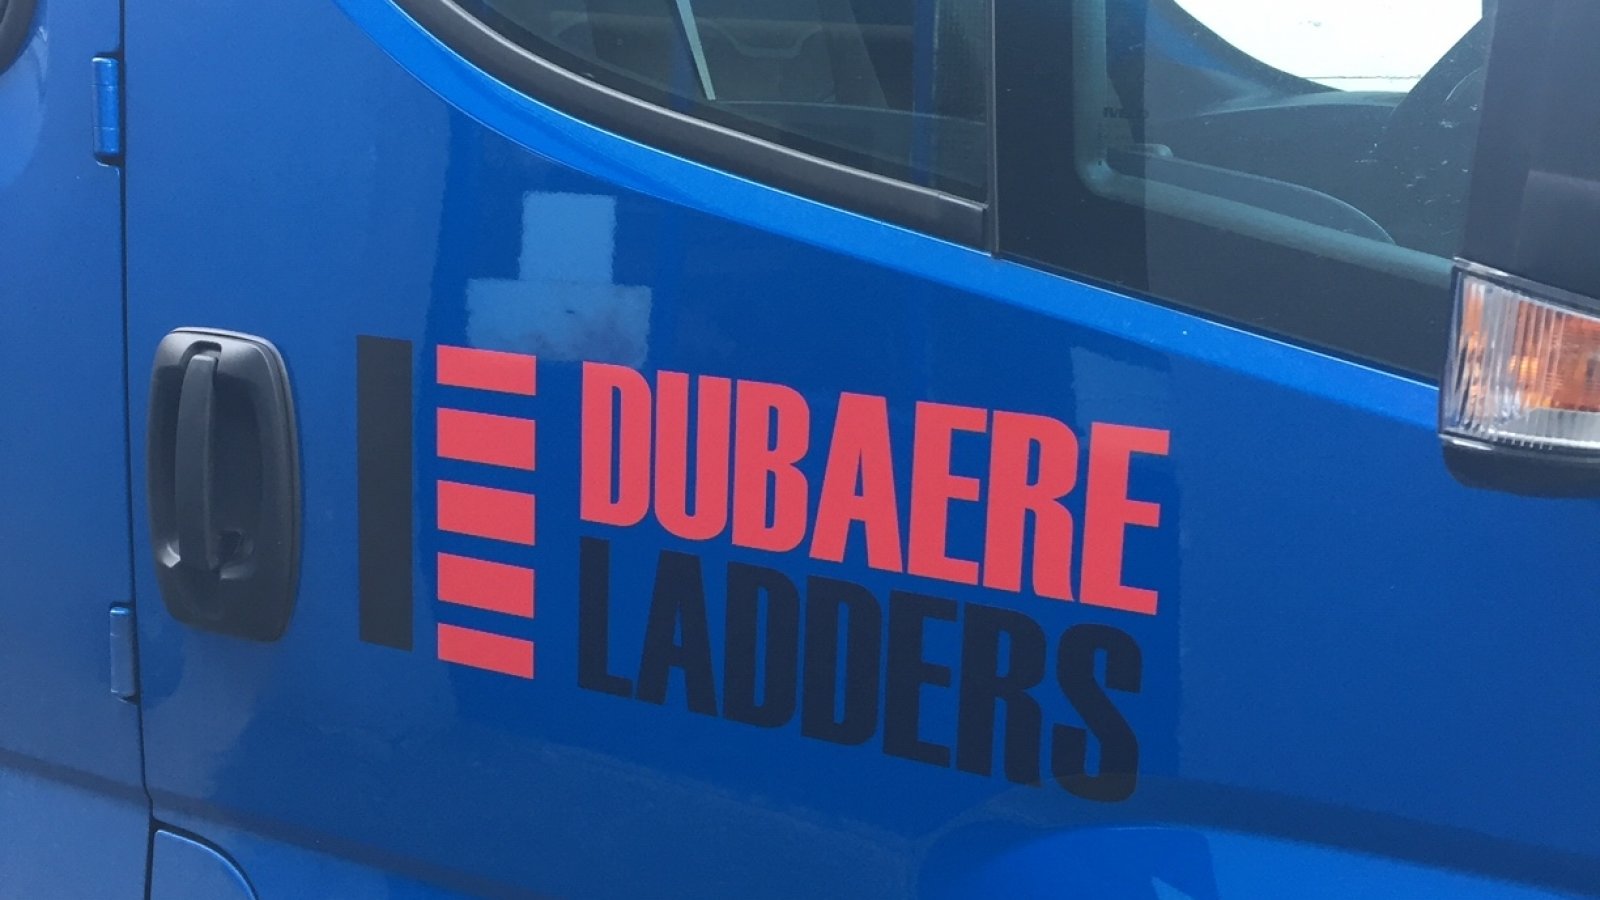 Check It Out Now - Artikel - Dubaere Ladders